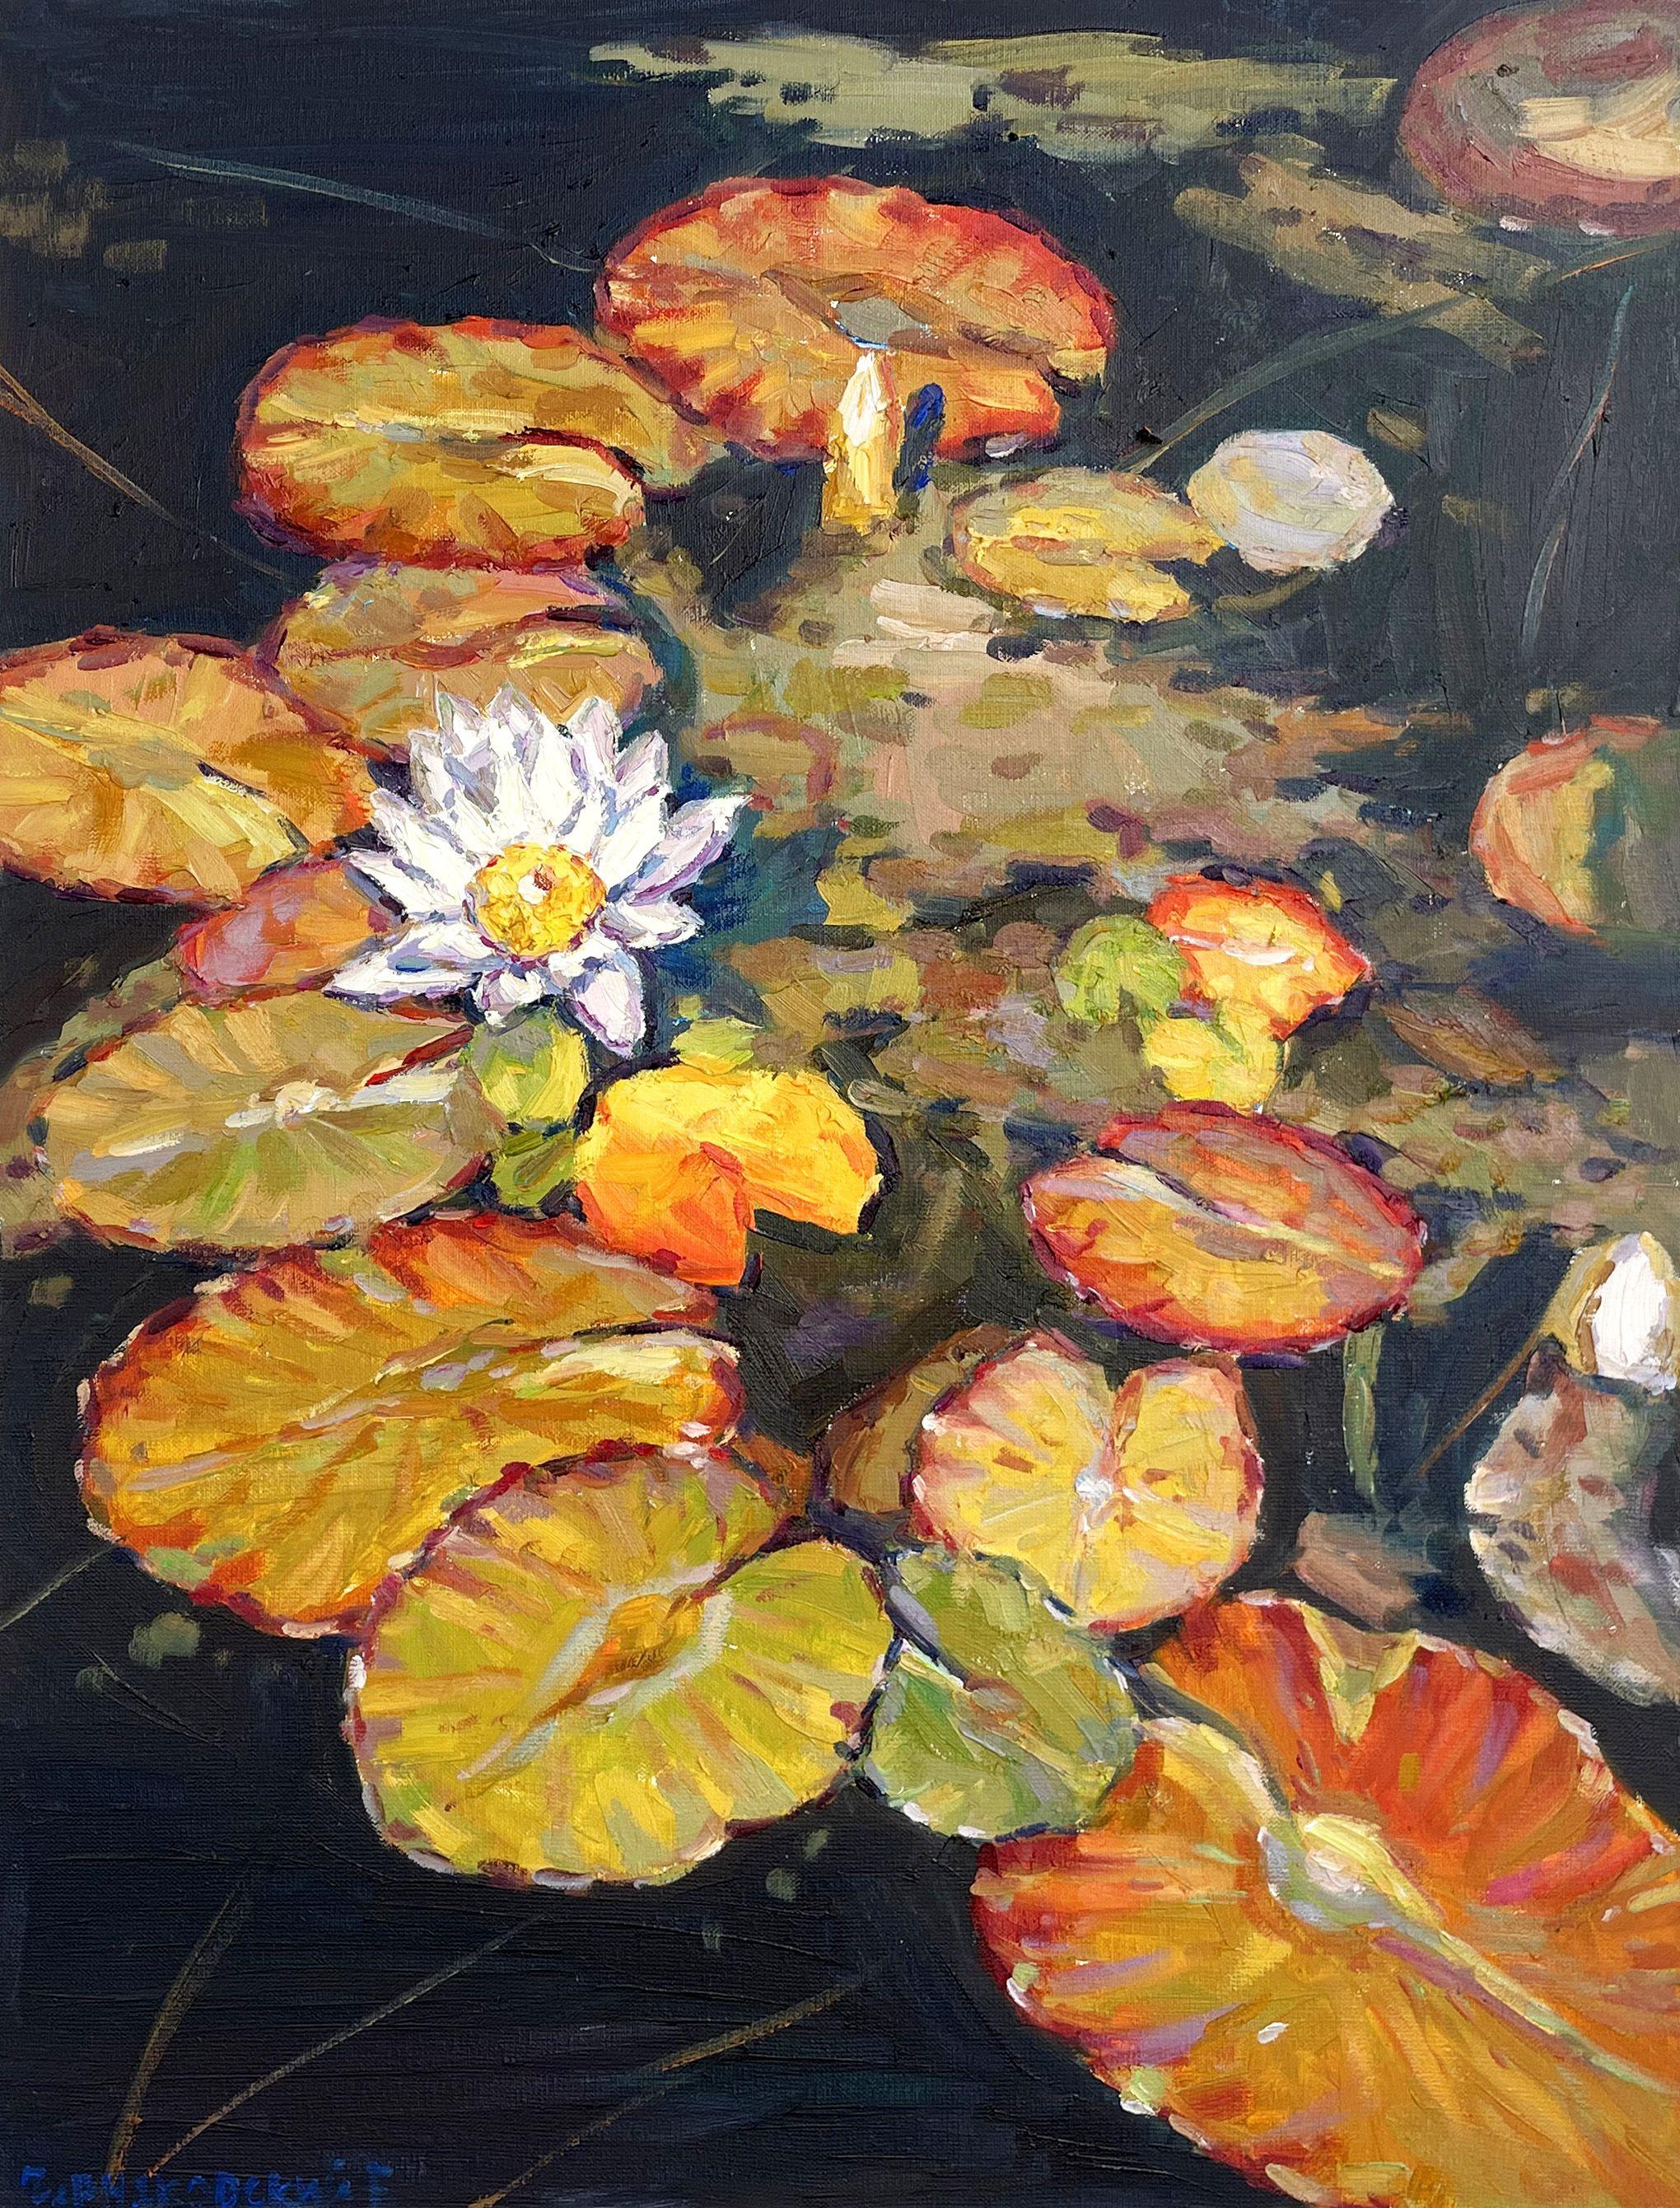 Original Oil painting by Ukrainian artist Evgeny Chernyakovsky    "Water lily"  60.0 X 80.0 CM / 23.6 X 31.4IN  HIGH QUALITY oil on canvas  Signed on the front and back  Dated 2023  Good condition  GUARANTEE OF AUTHENTICITY :: Painting ::